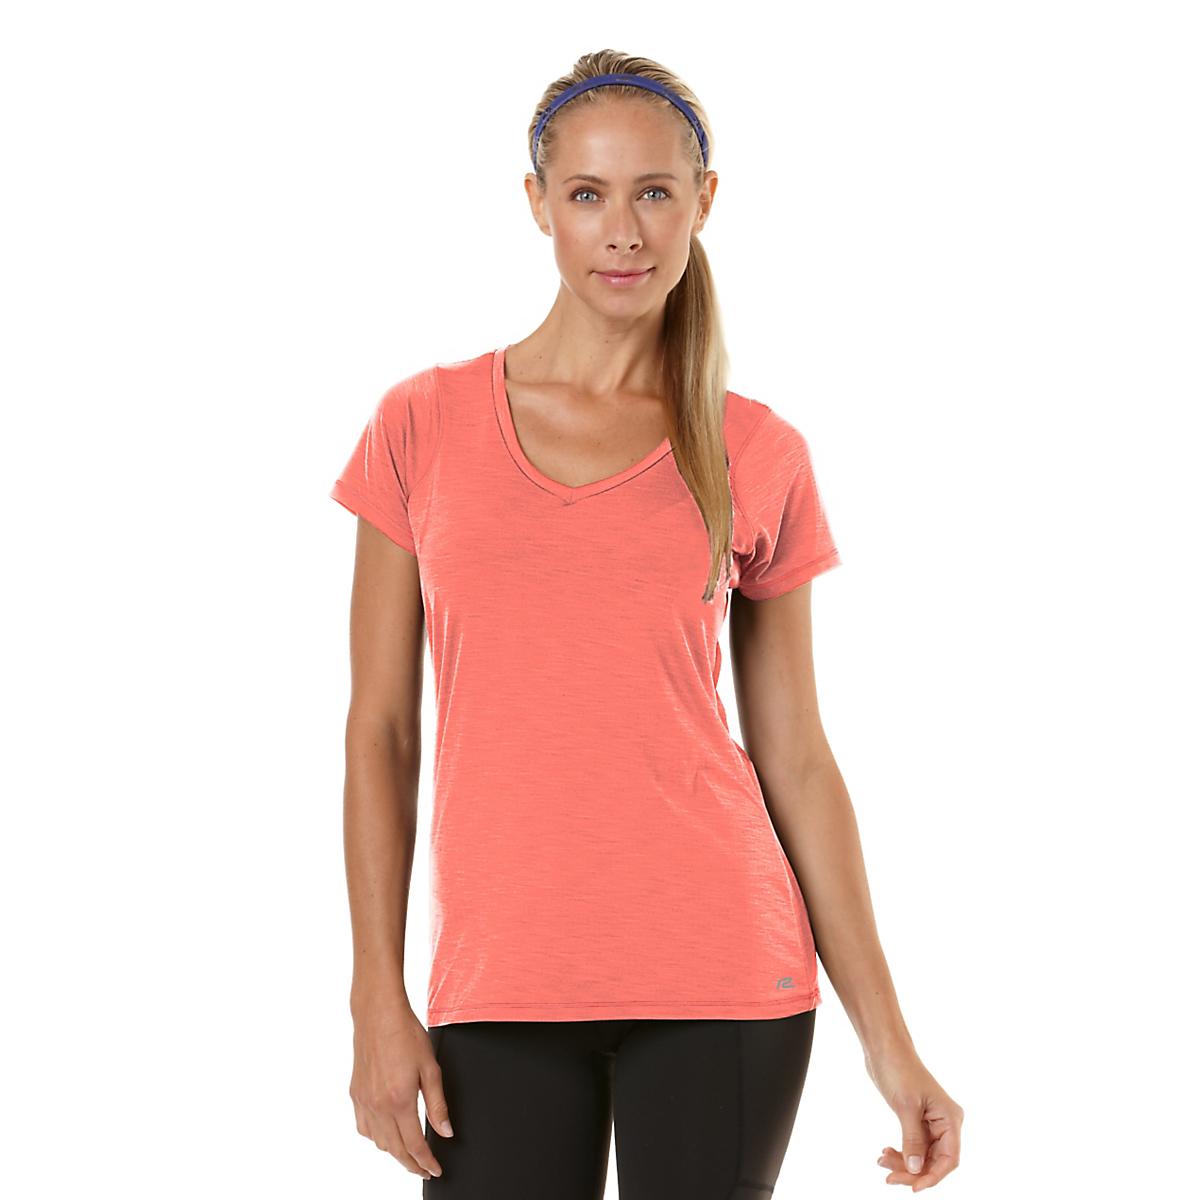 Womens R-Gear Fast and Fab Short Sleeve Technical Top at Road Runner Sports